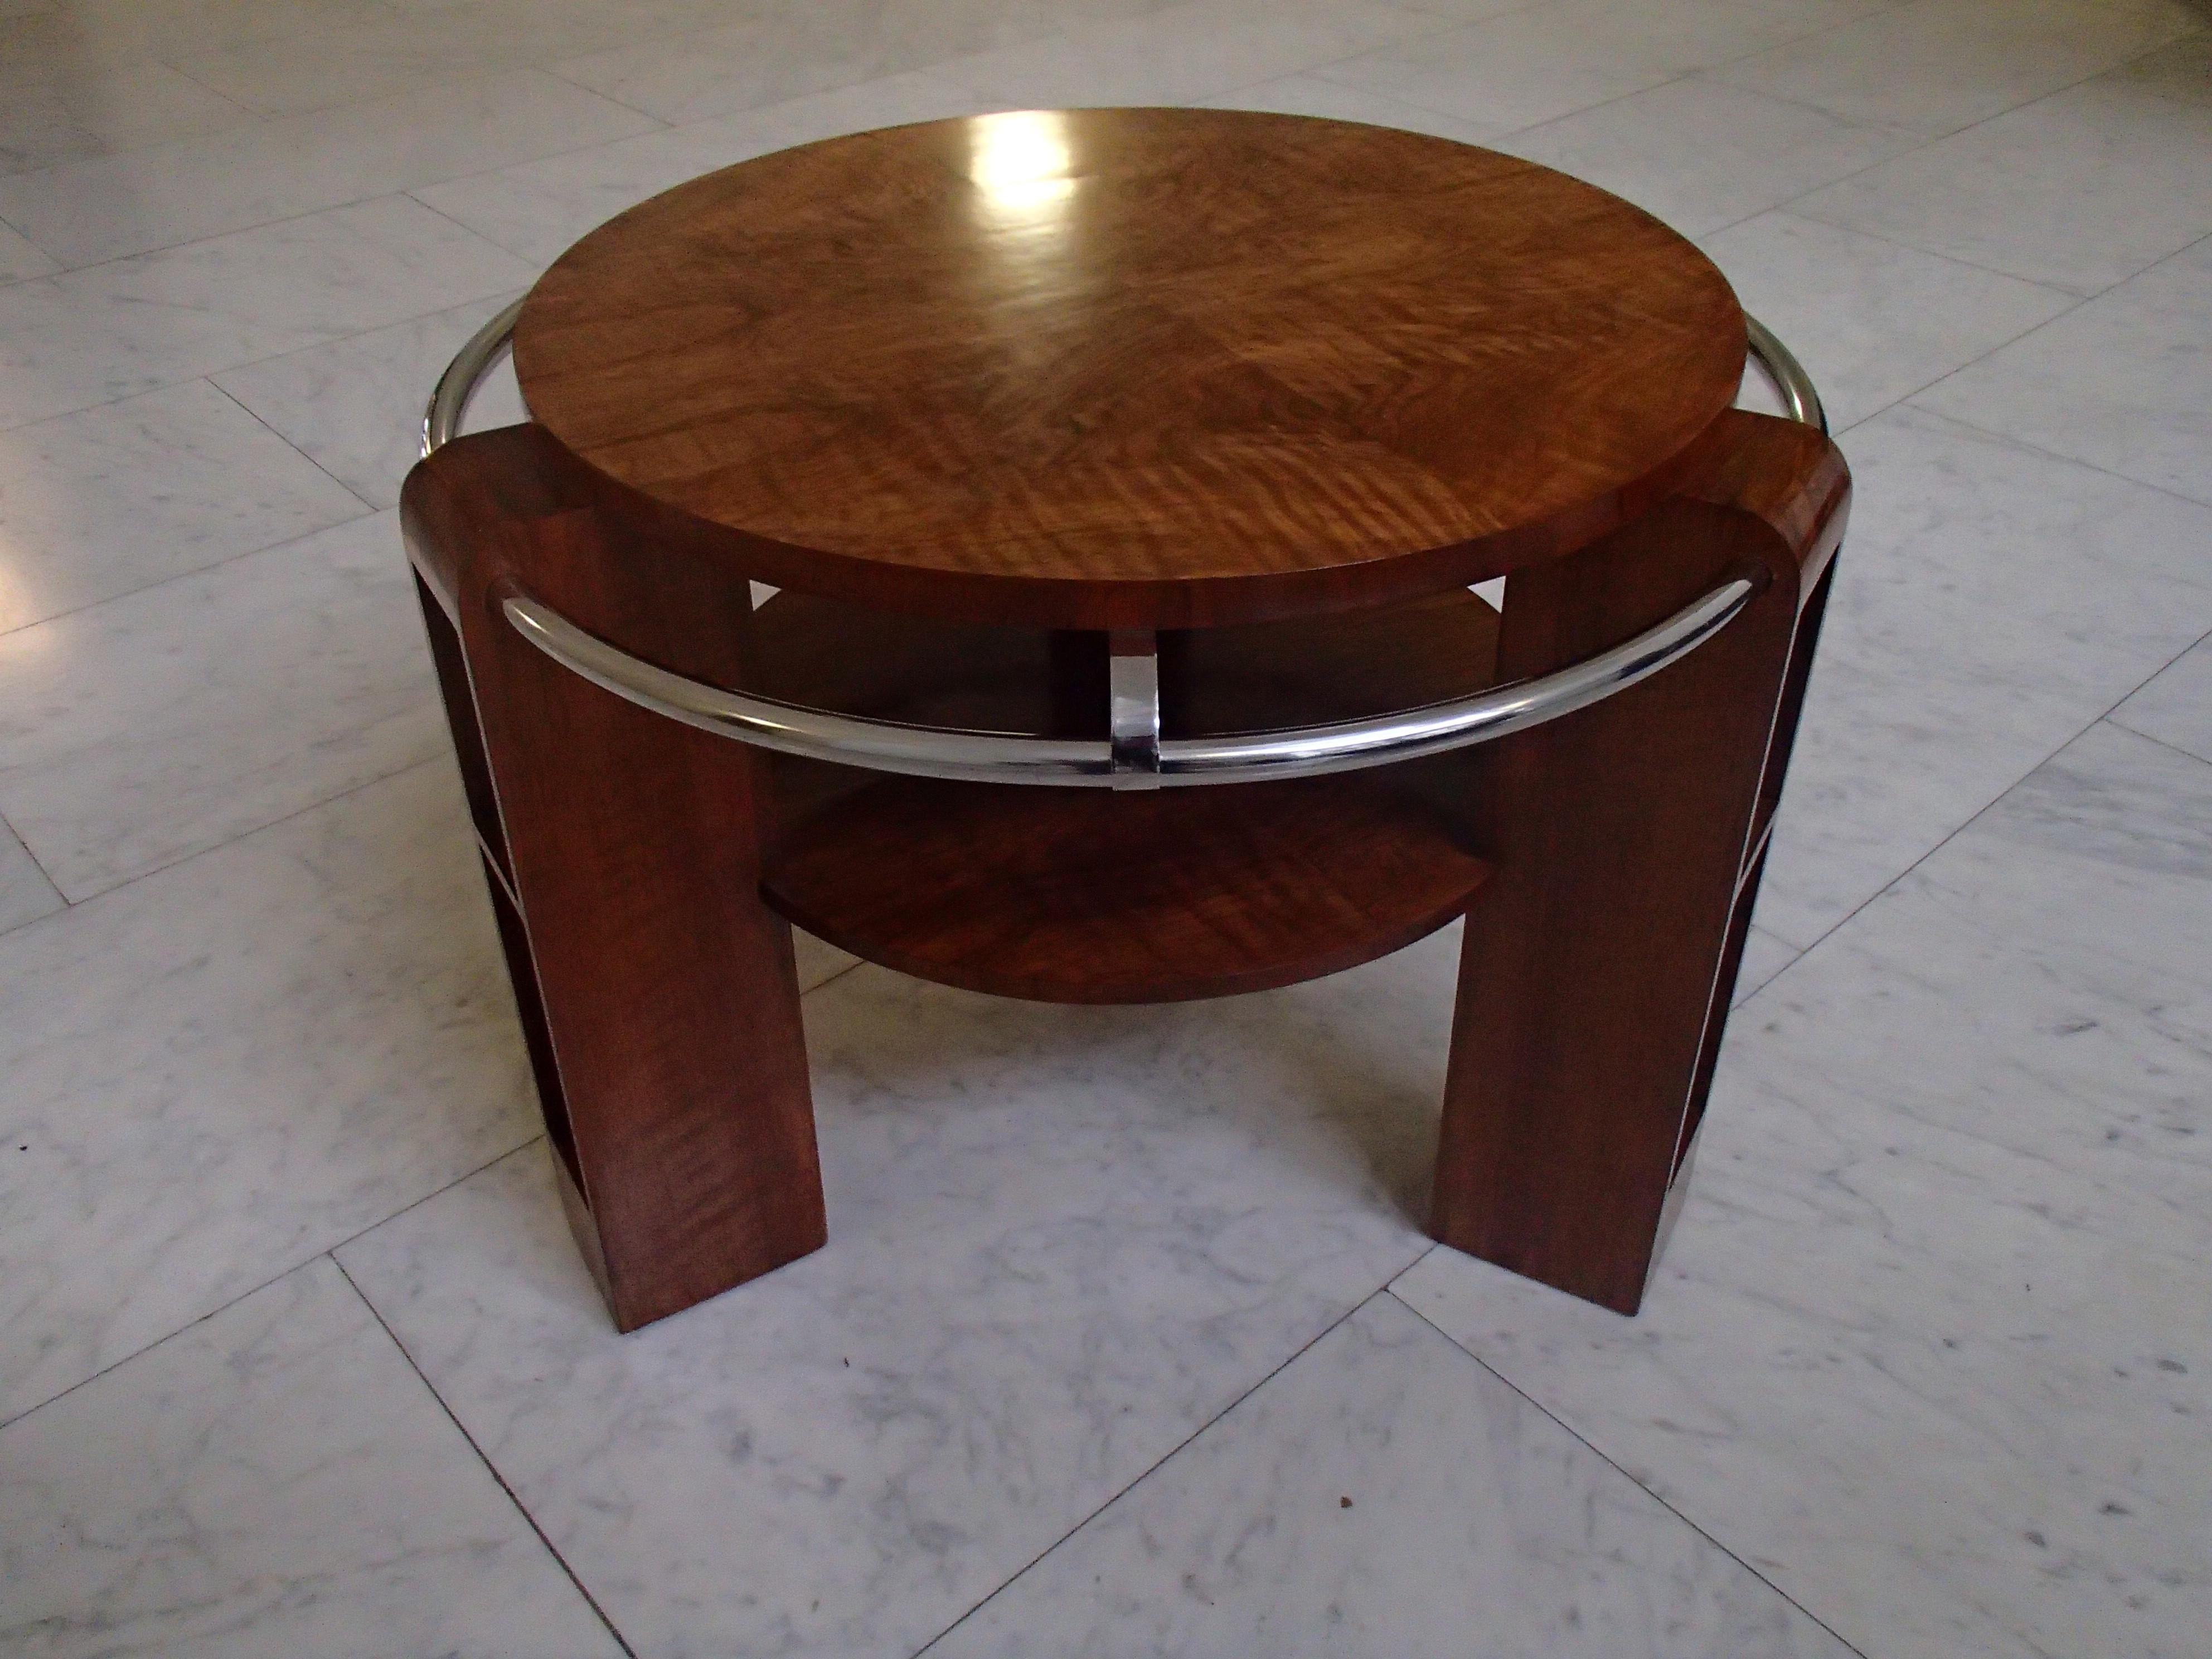 Mid-20th Century Art Deco Coffee or Sofa Table Walnut with Chrome Ring and Shelf's in the Legs